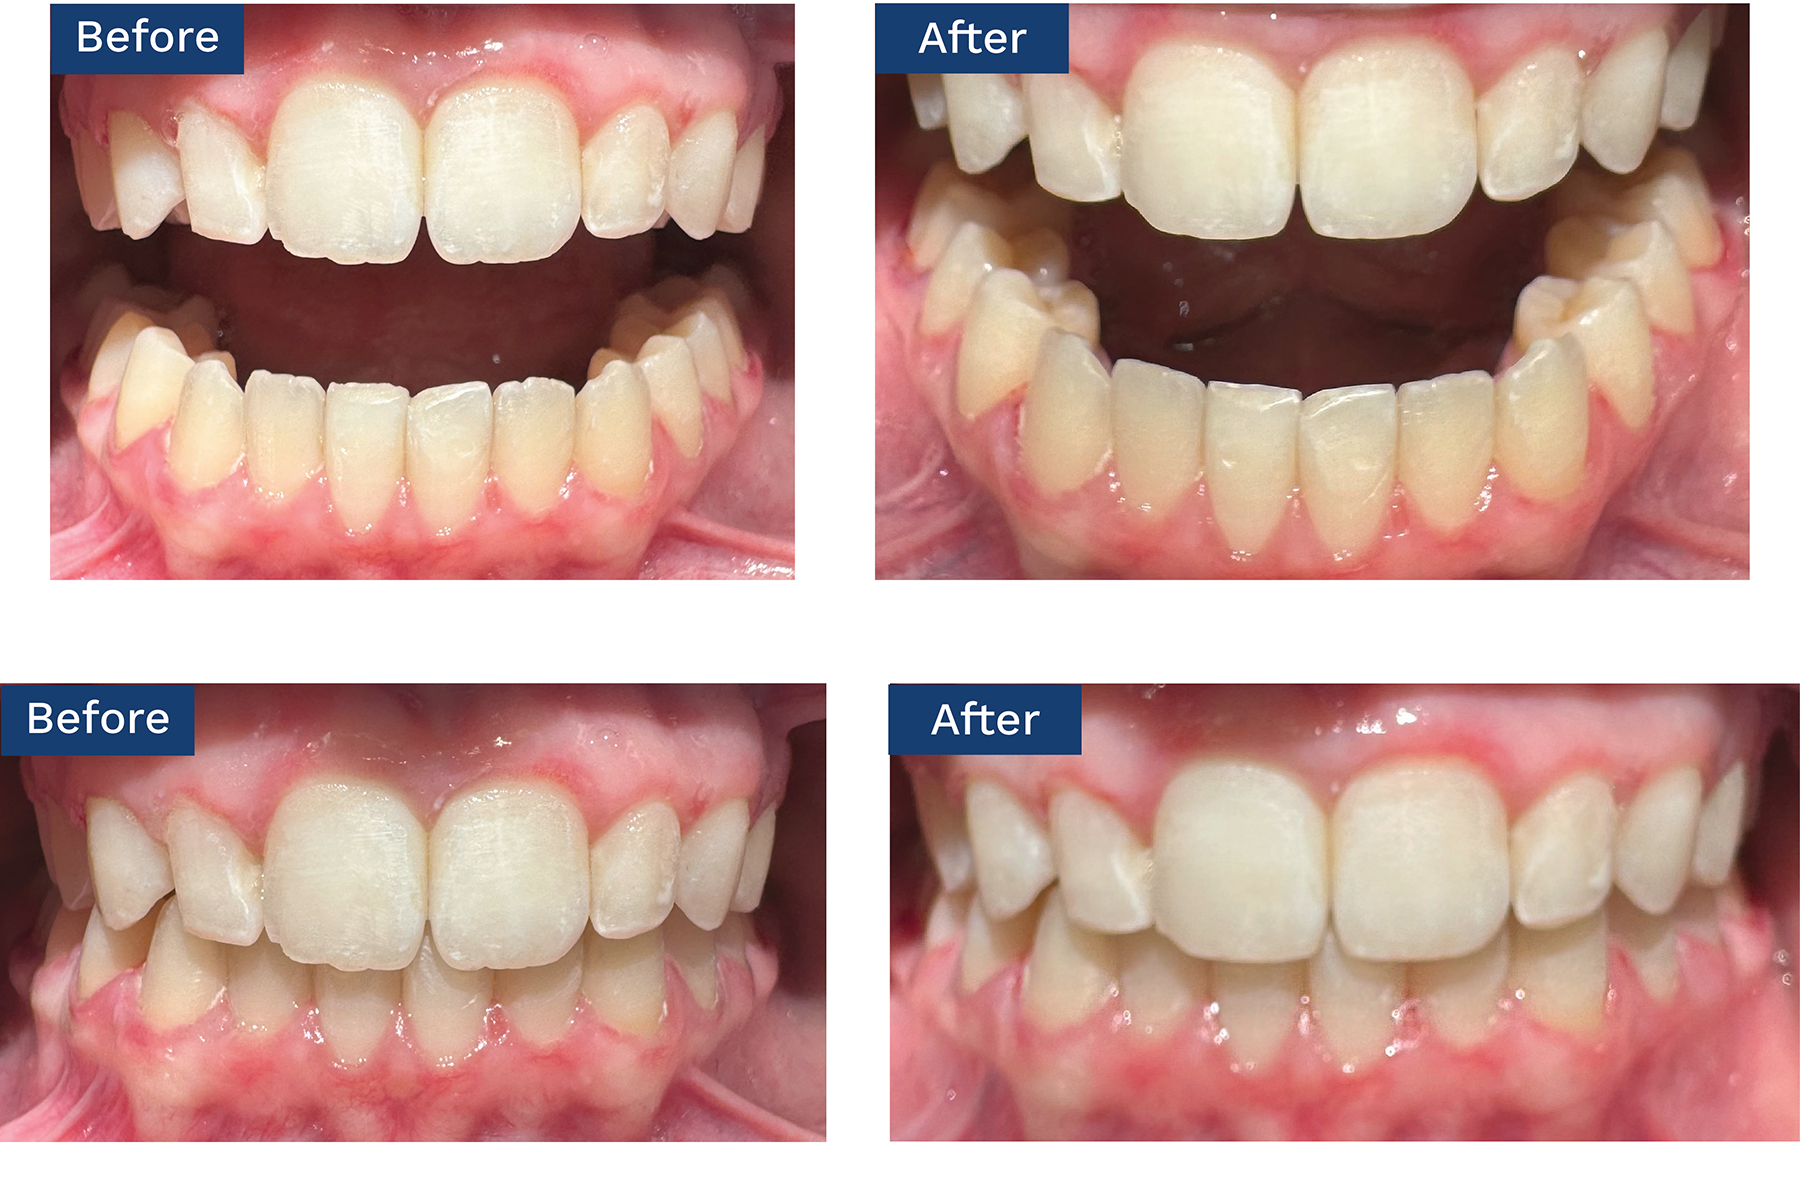 An example of how a patient can benefit from the esthetic enhancements provided by combining enameloplasty with clear aligner treatment | Image Credit: © Robert M. Stern, DMD